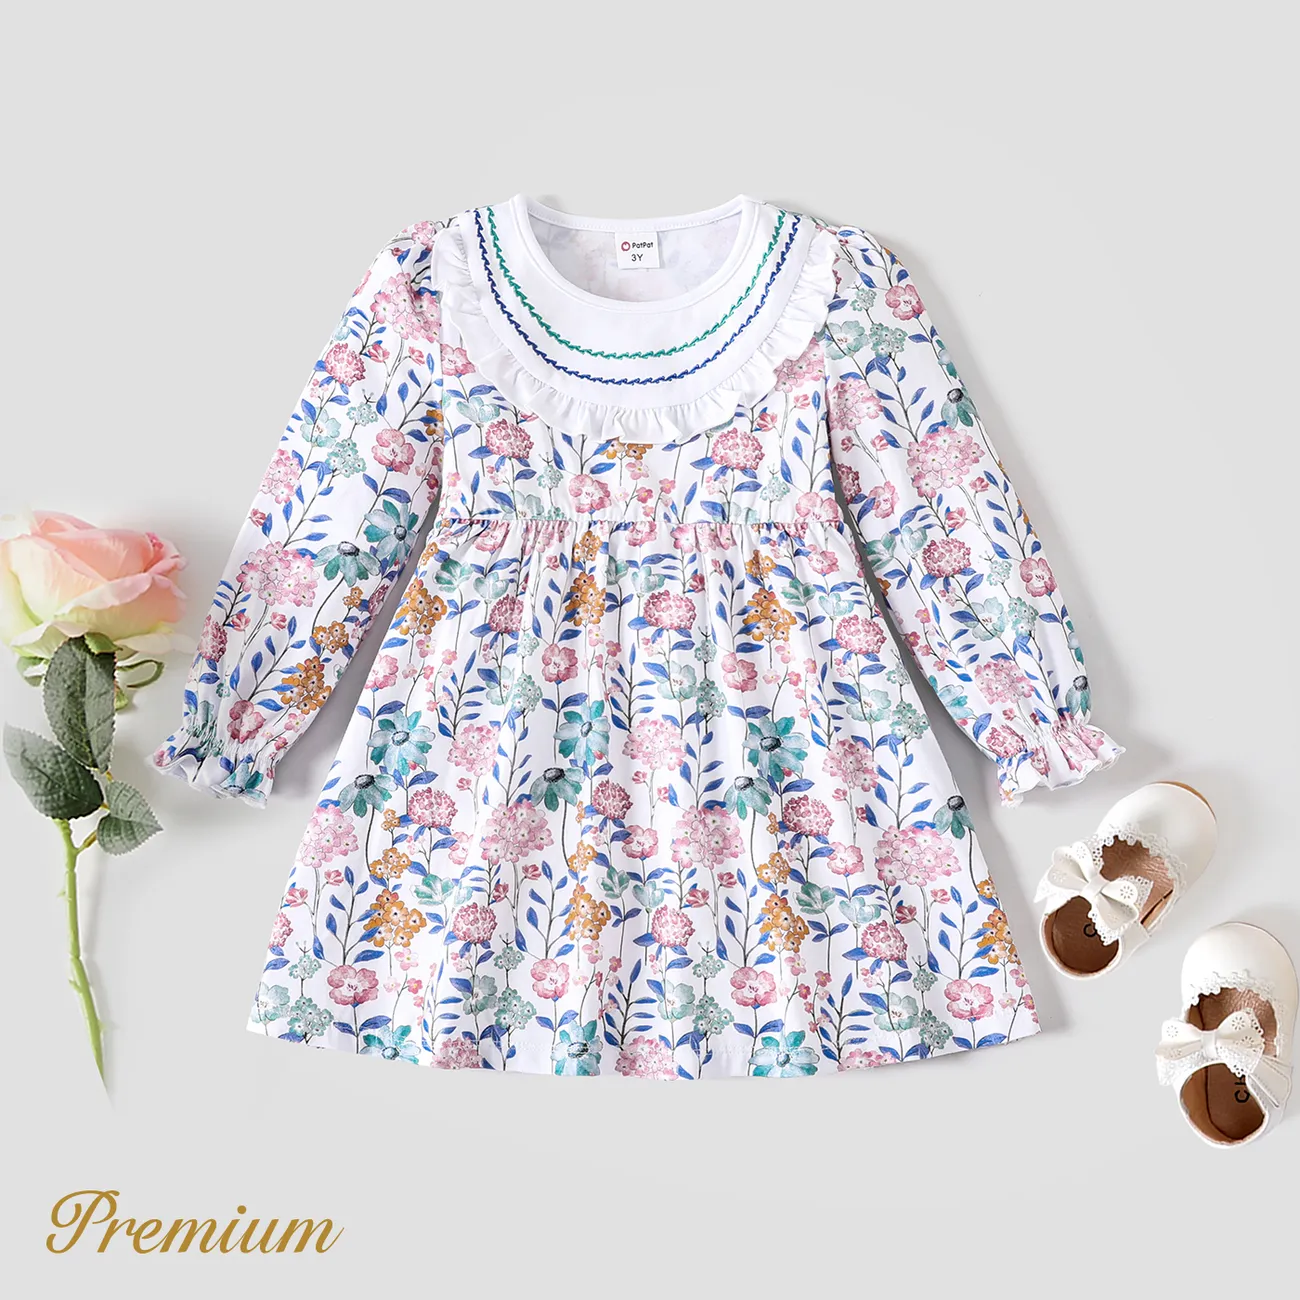 Elegant Toddler Girl Floral Dress with Ruffle Edge Colorful big image 1